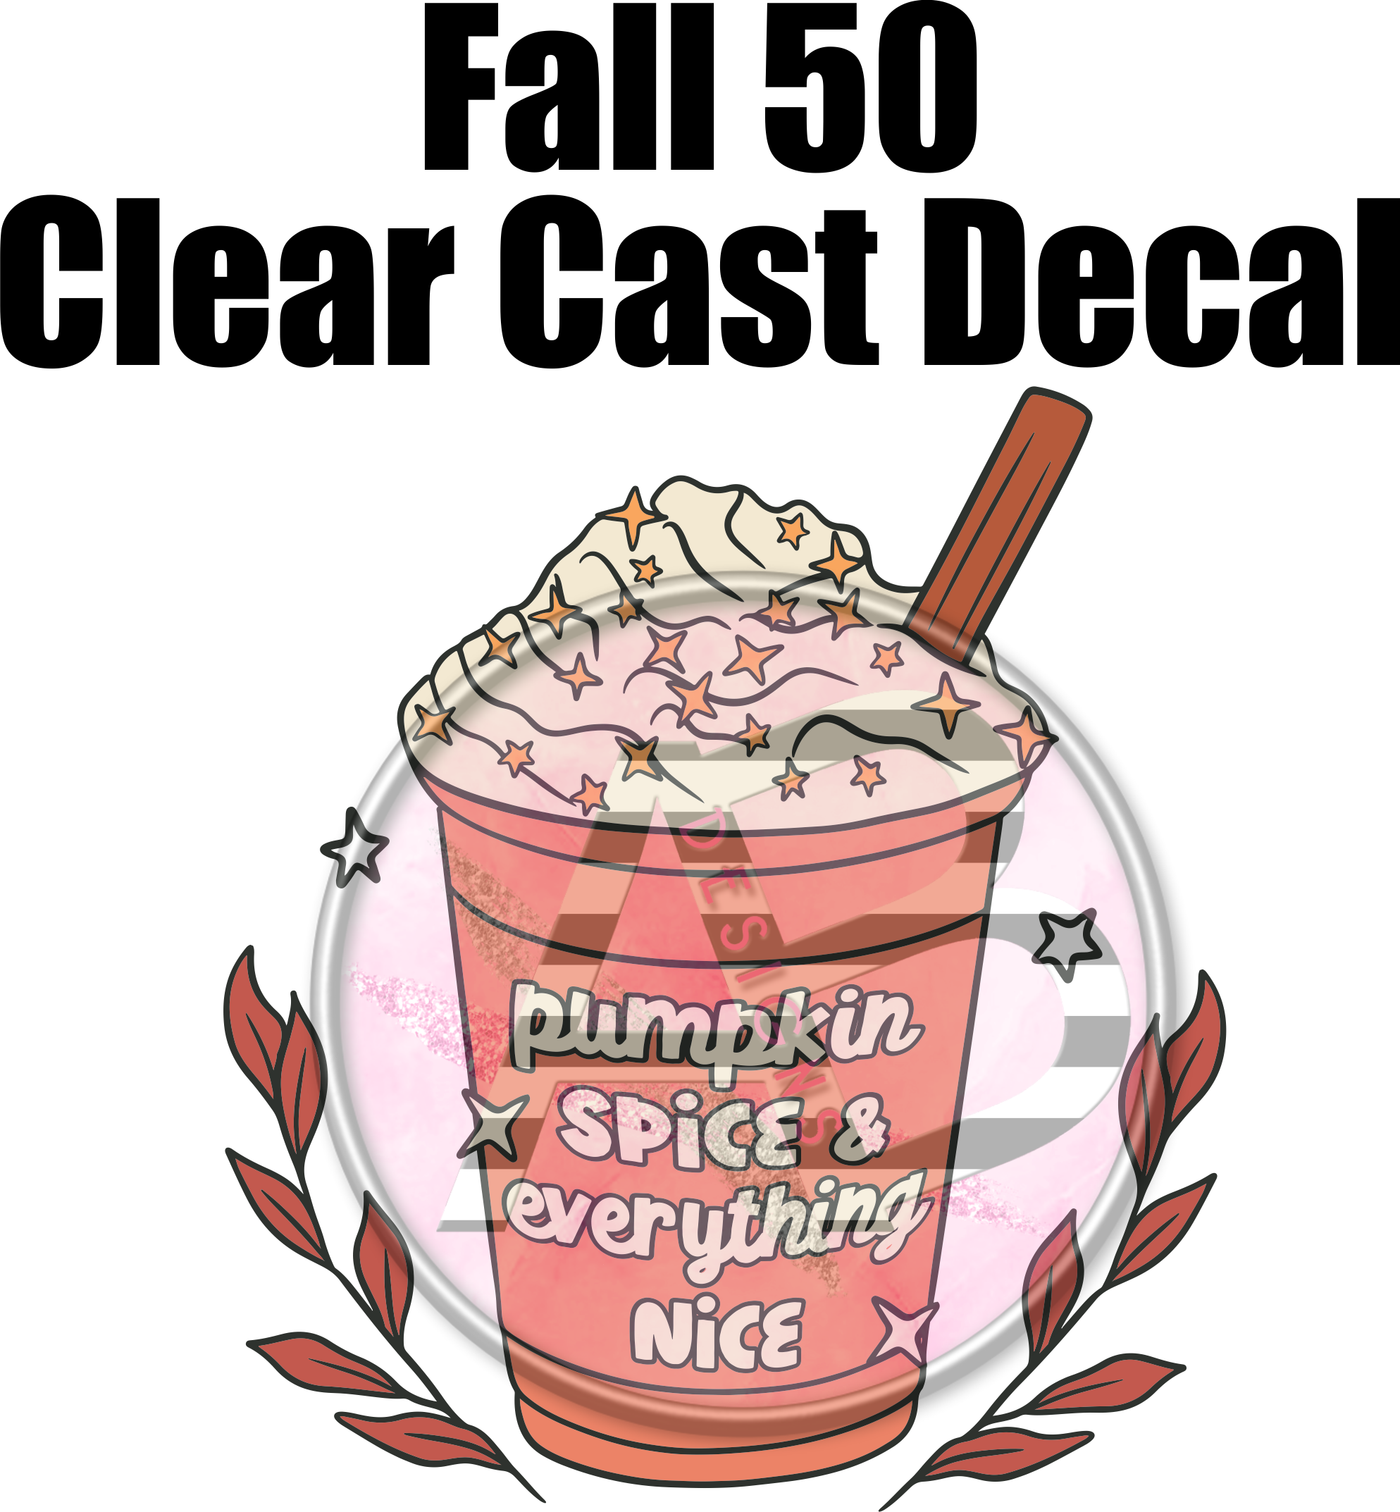 Fall 50 - Clear Cast Decal